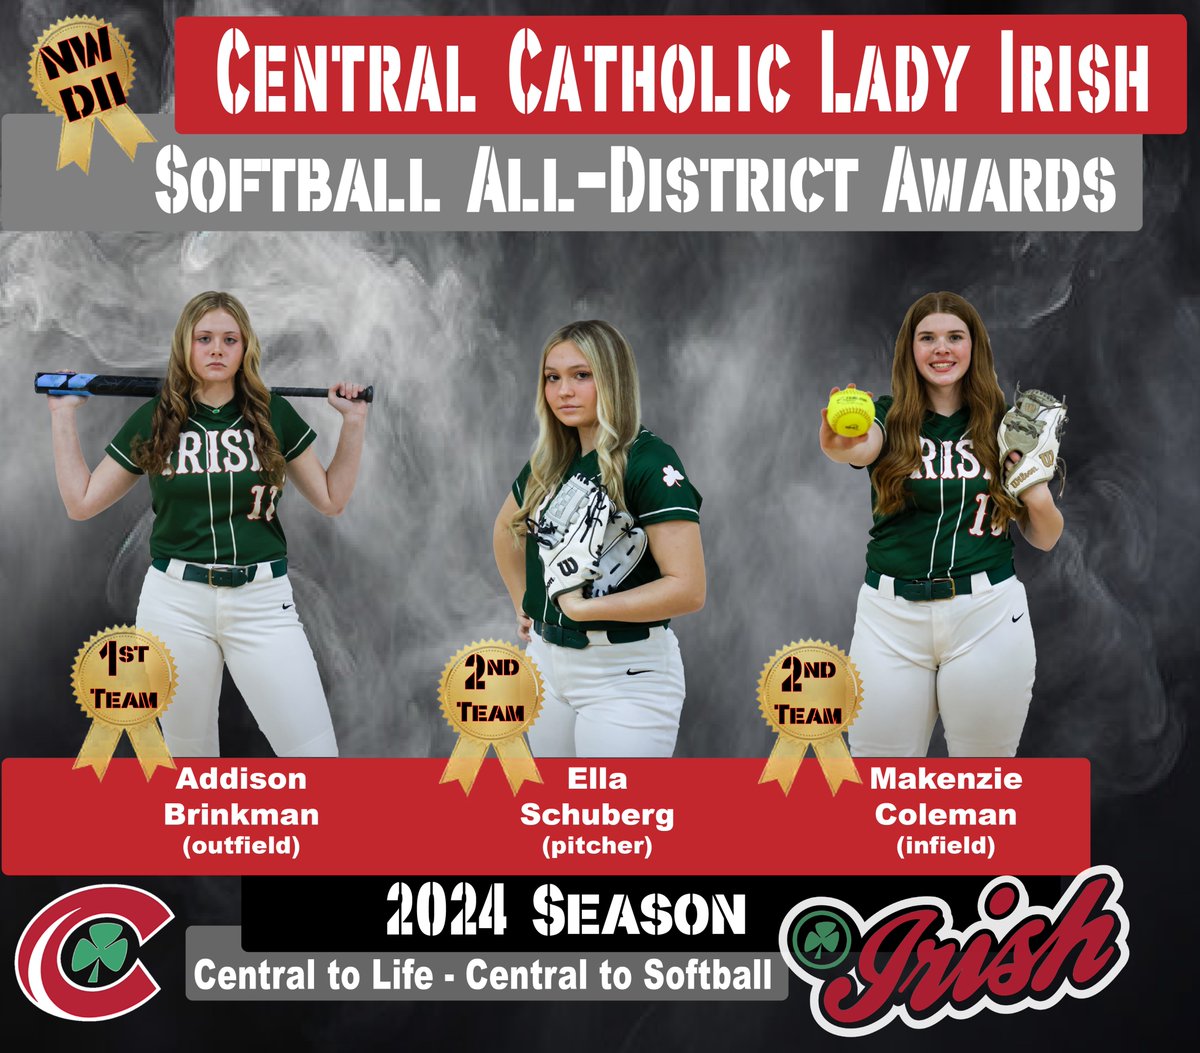 Congrats to our @centralcatholic Irish Softball players on their Ohio Division II, All-District honors! Addison Brinkman @addy_brinkman earned All-District First Team Honors. Ella Schuberg @ella_schuberg & Makenzie Coleman @KenzCole40 earned All-District Second Team Honors!